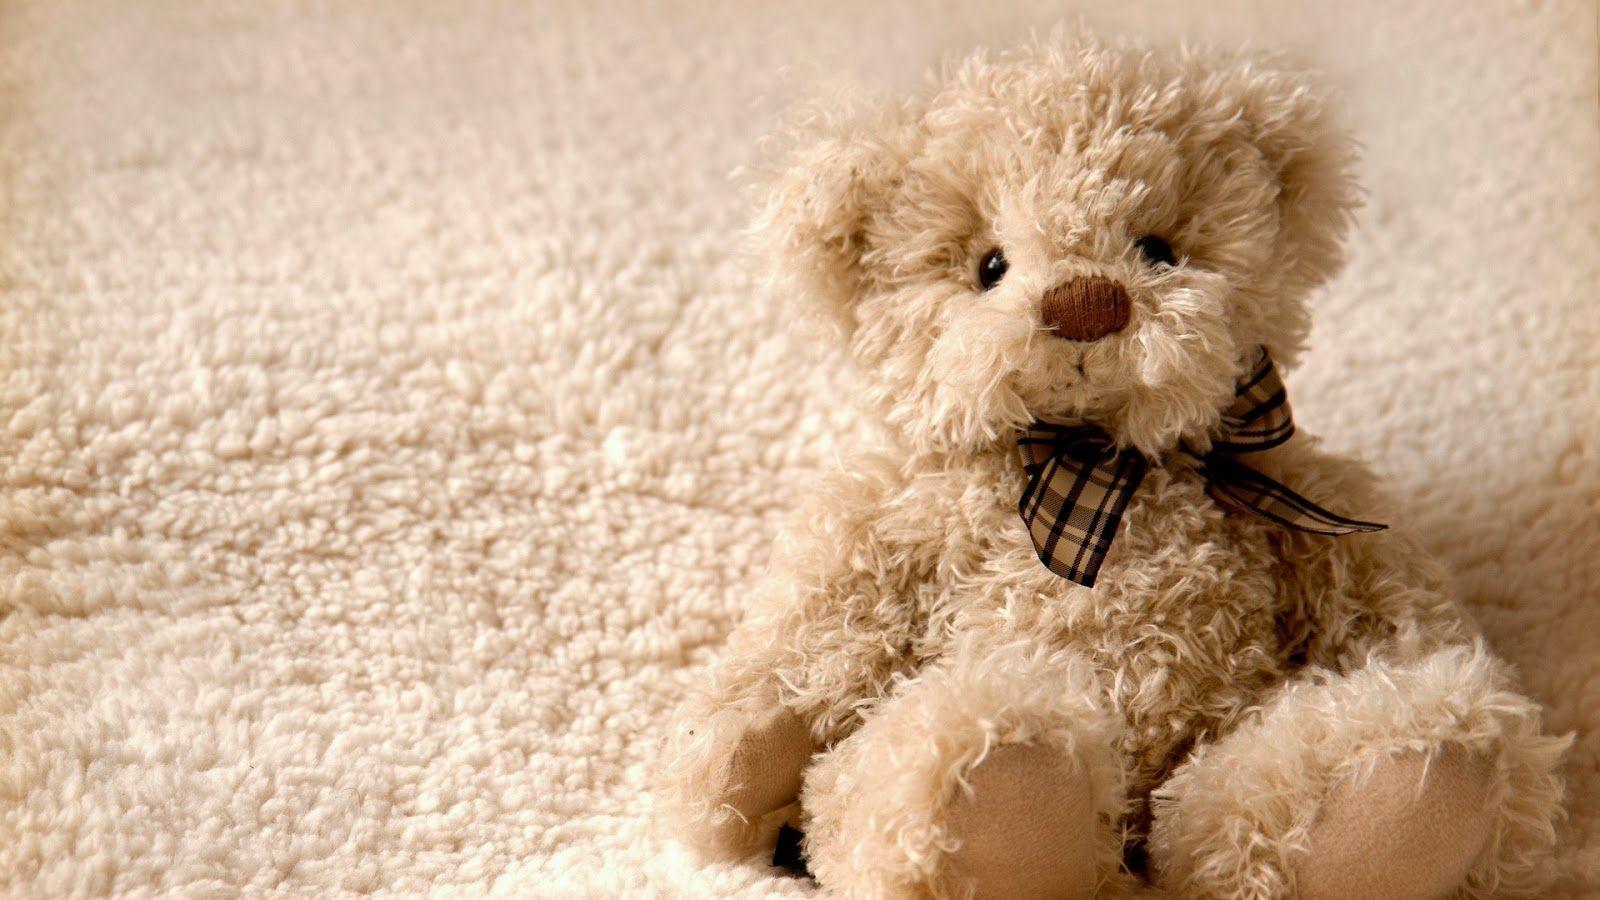 Free Teddy Bear HD Wallpaper. Happy New Year 2018 Wishes Quotes